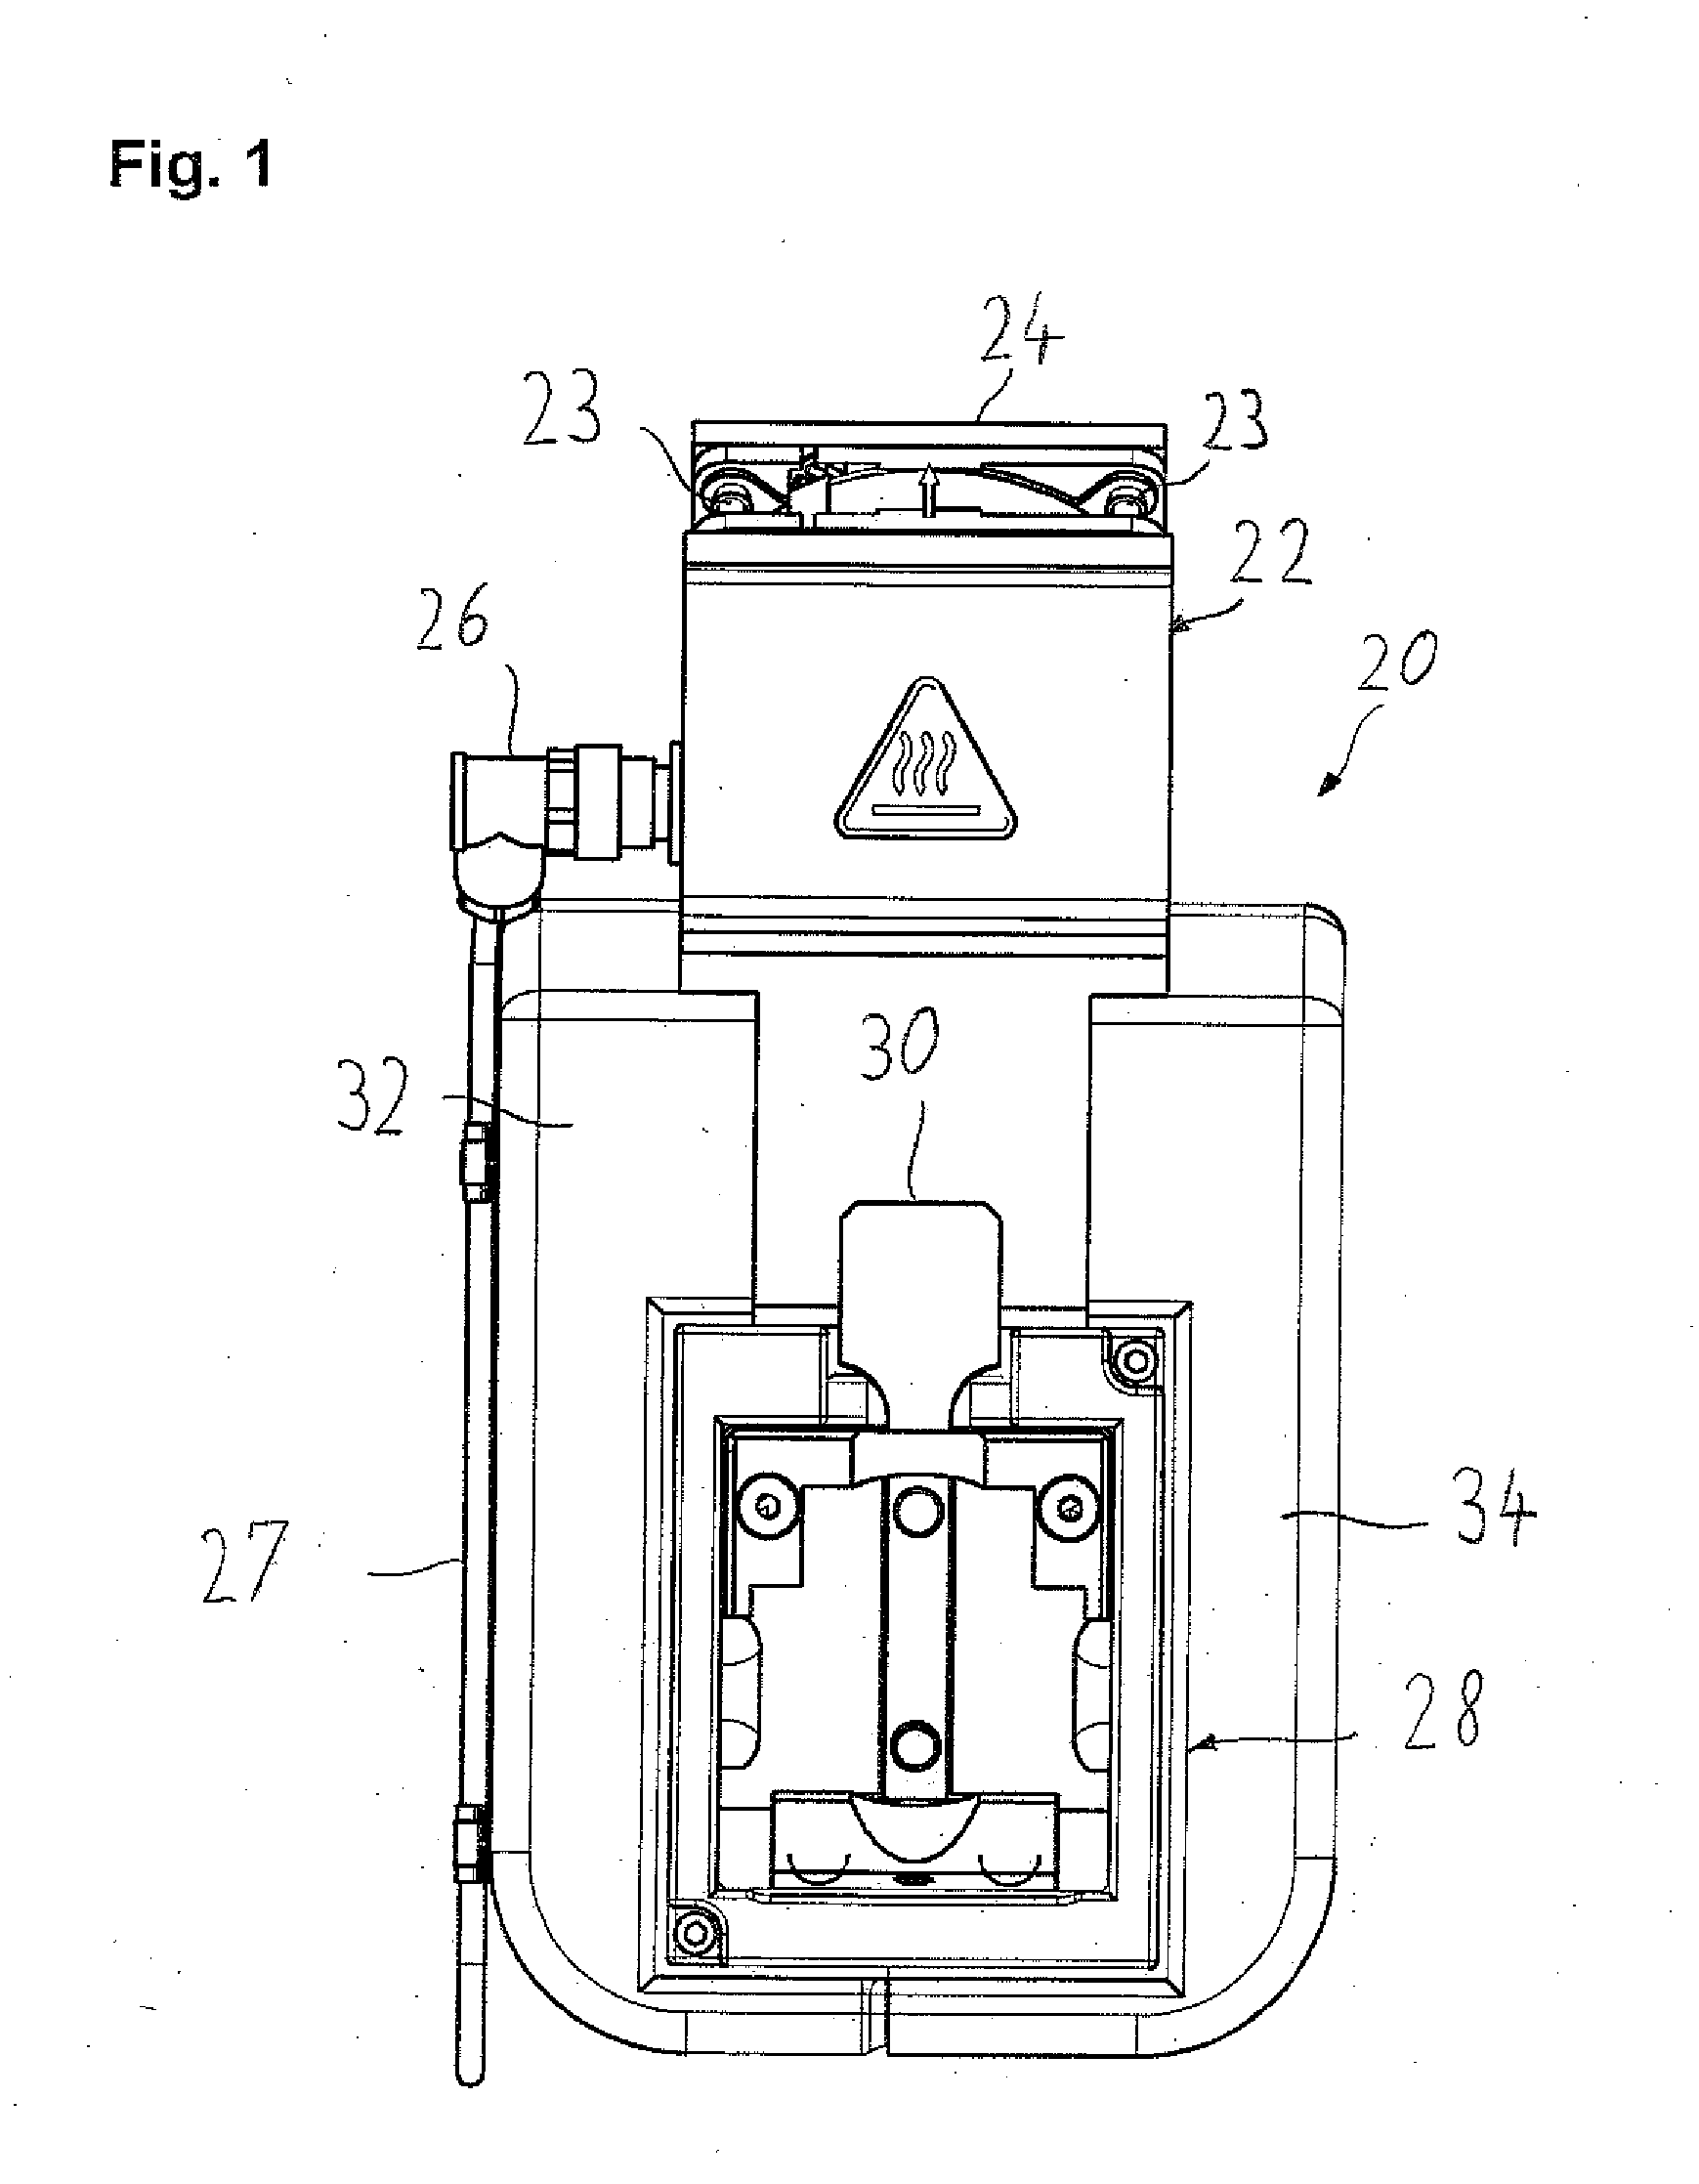 Microtome Cassette Clamp Having An Air Channel For Dissipating The Heat Of A Cooling Element, And Microtome